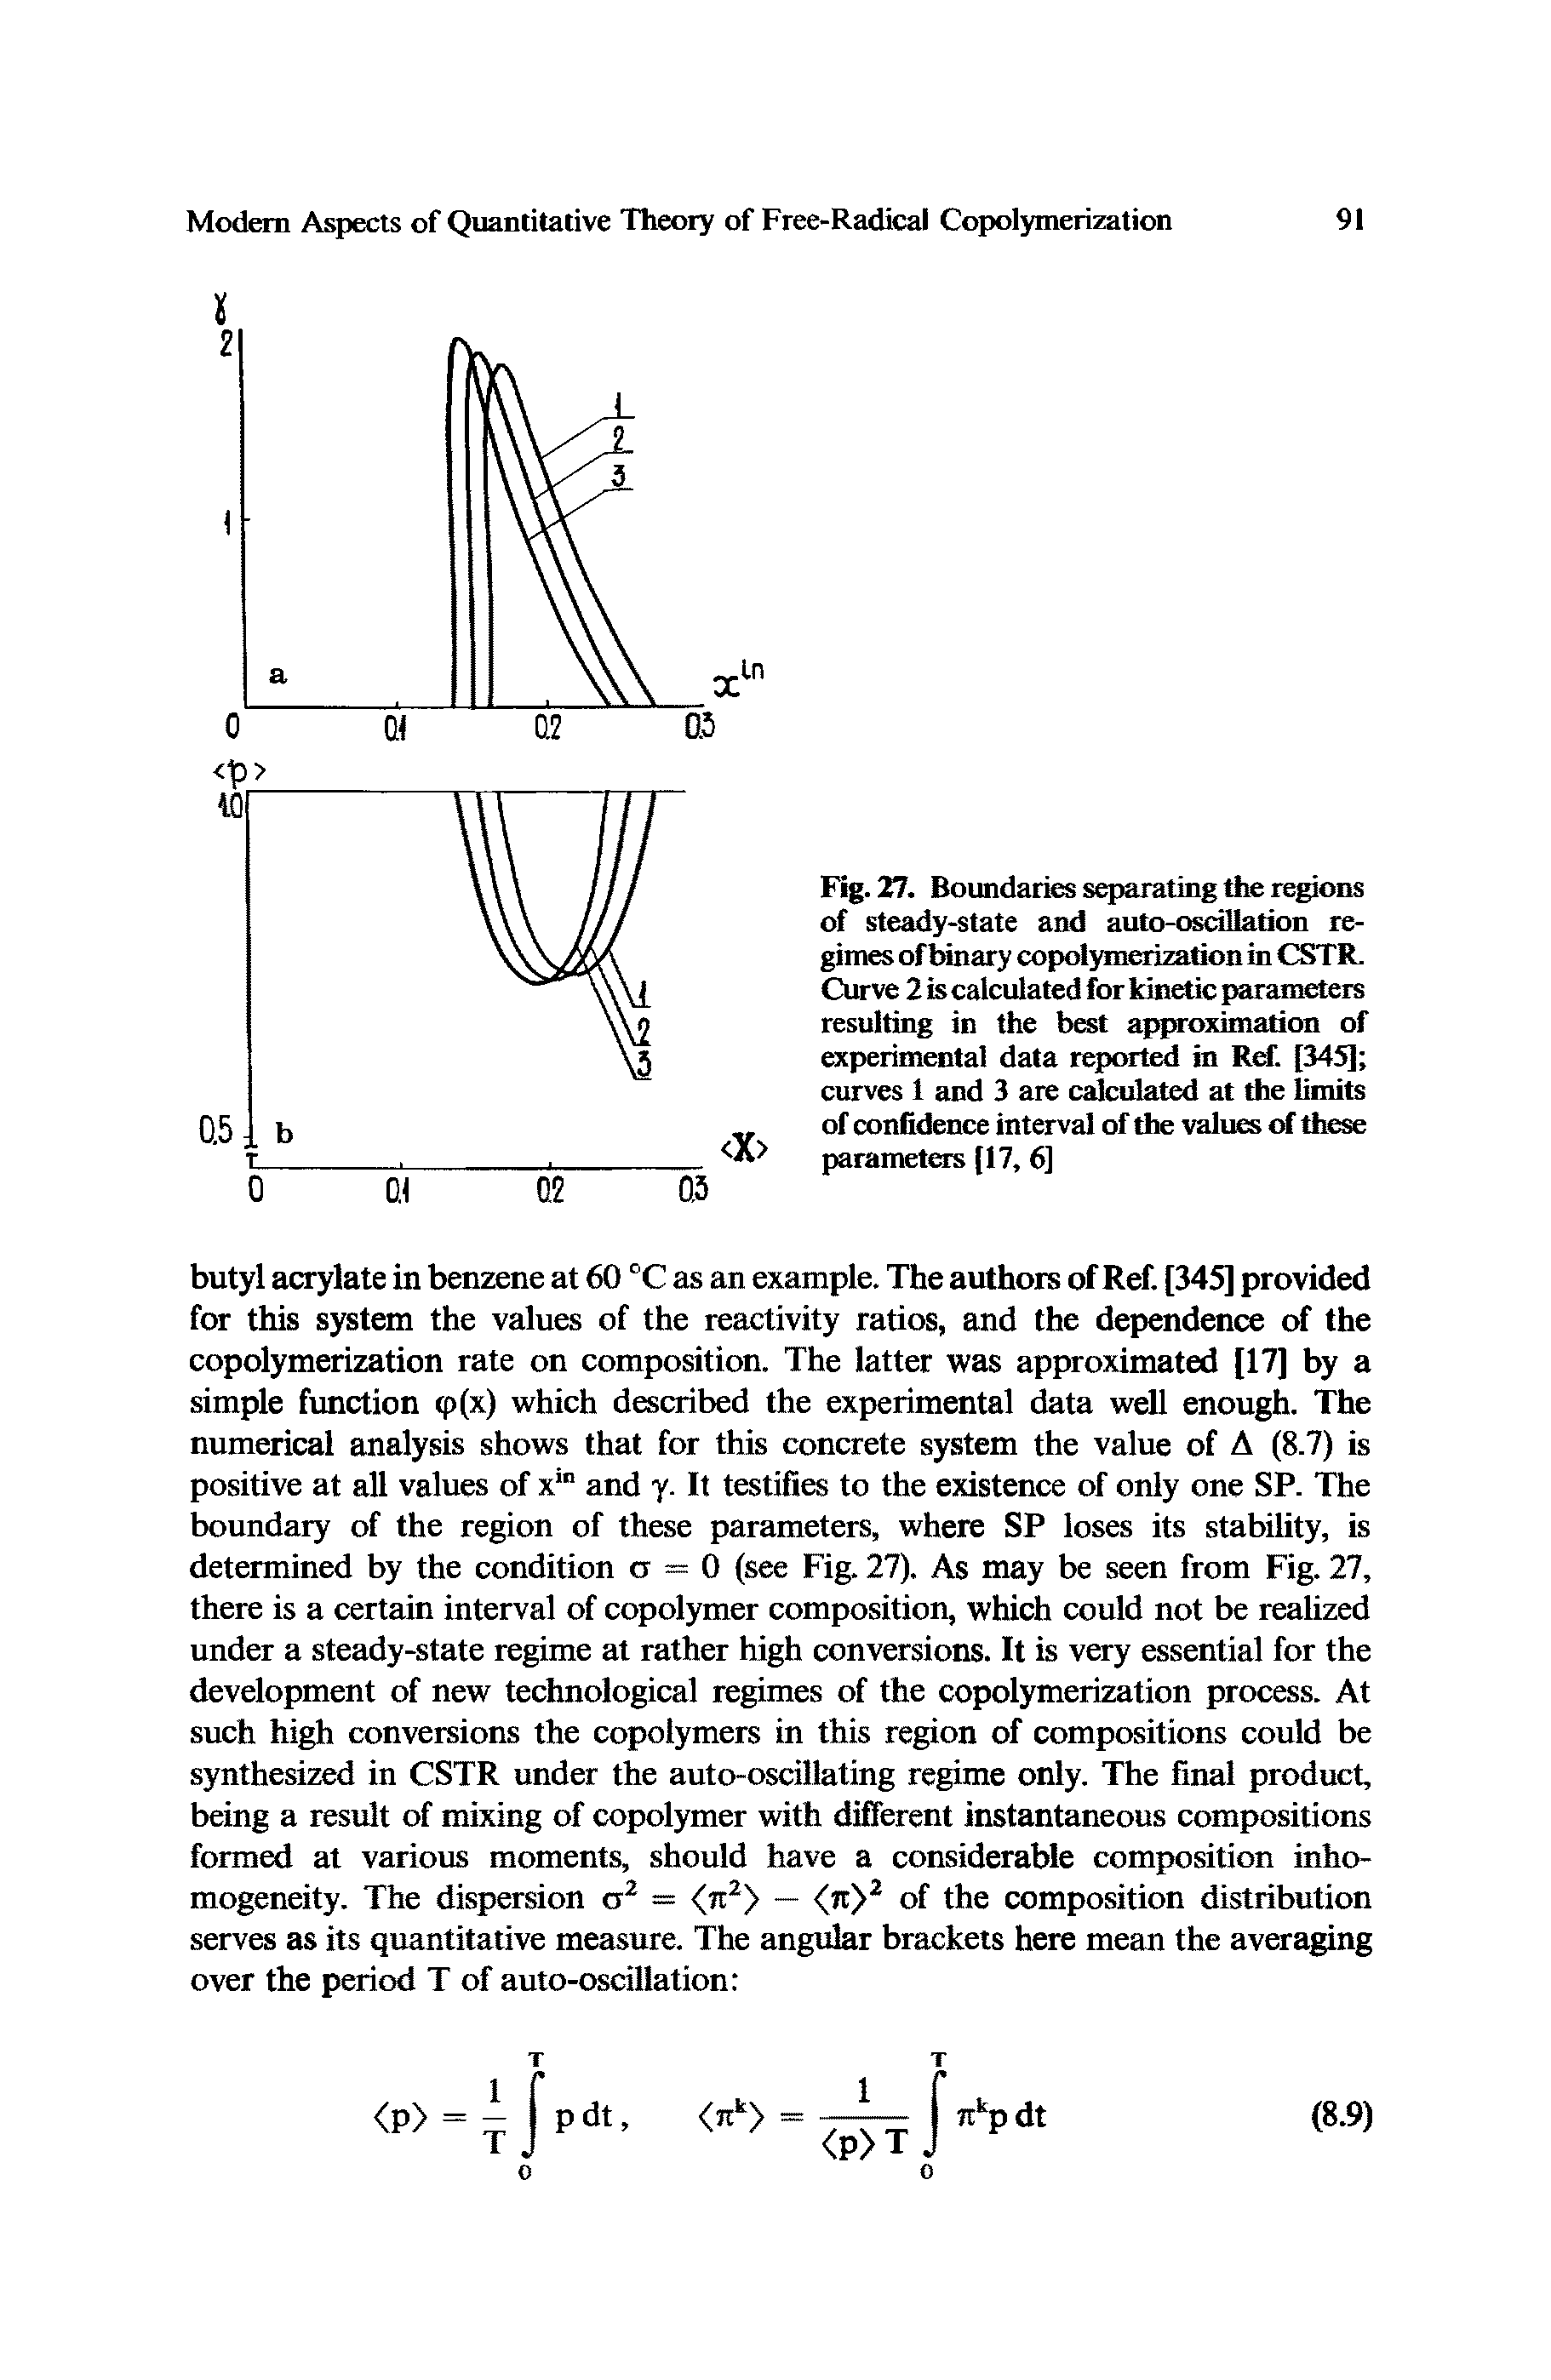 Fig. 27. Boundaries separating the regions of steady-state and auto-oscillation regimes of binary copolymerization in CSTR. Curve 2 is calculated for kinetic parameters resulting in the best approximation of experimental data reported in Ref. [345] curves 1 and 3 are calculated at the limits of confidence interval of the values of these parameters [17, 6]...